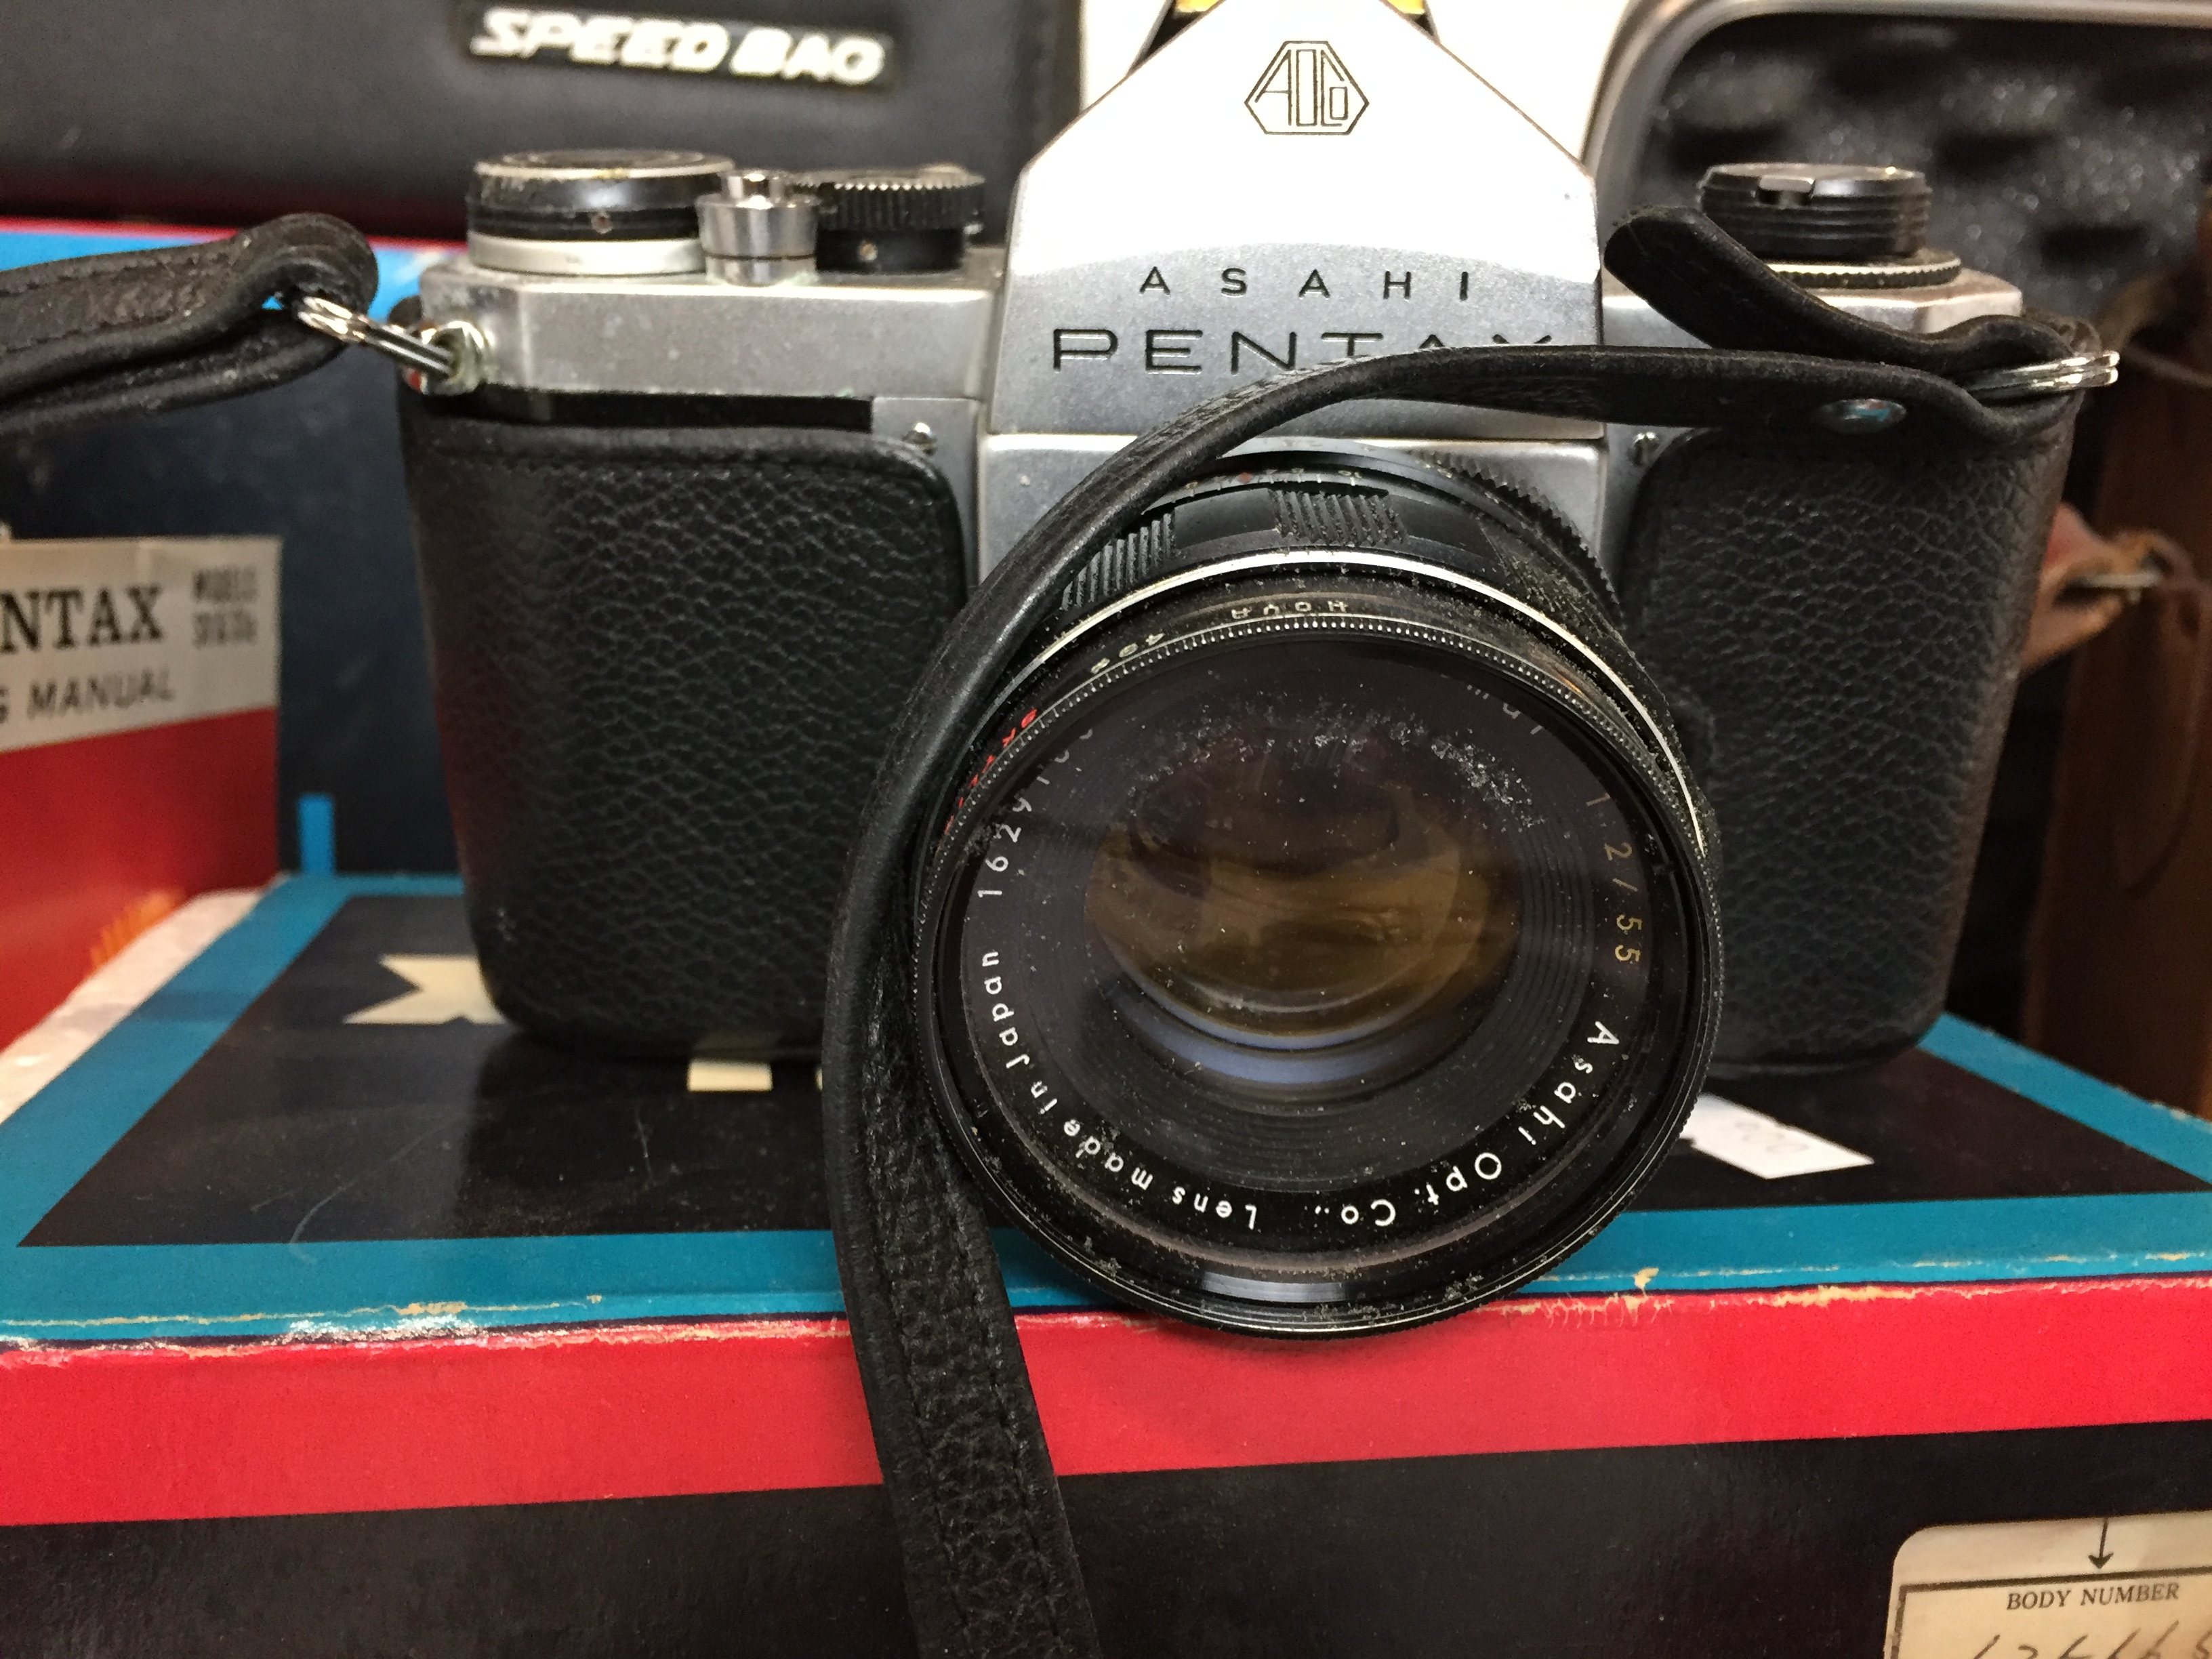 Twenty pieces of photographic equipment including Pentax S1a camera fitted with Asahi 1:2/5 5 lens - Image 2 of 6